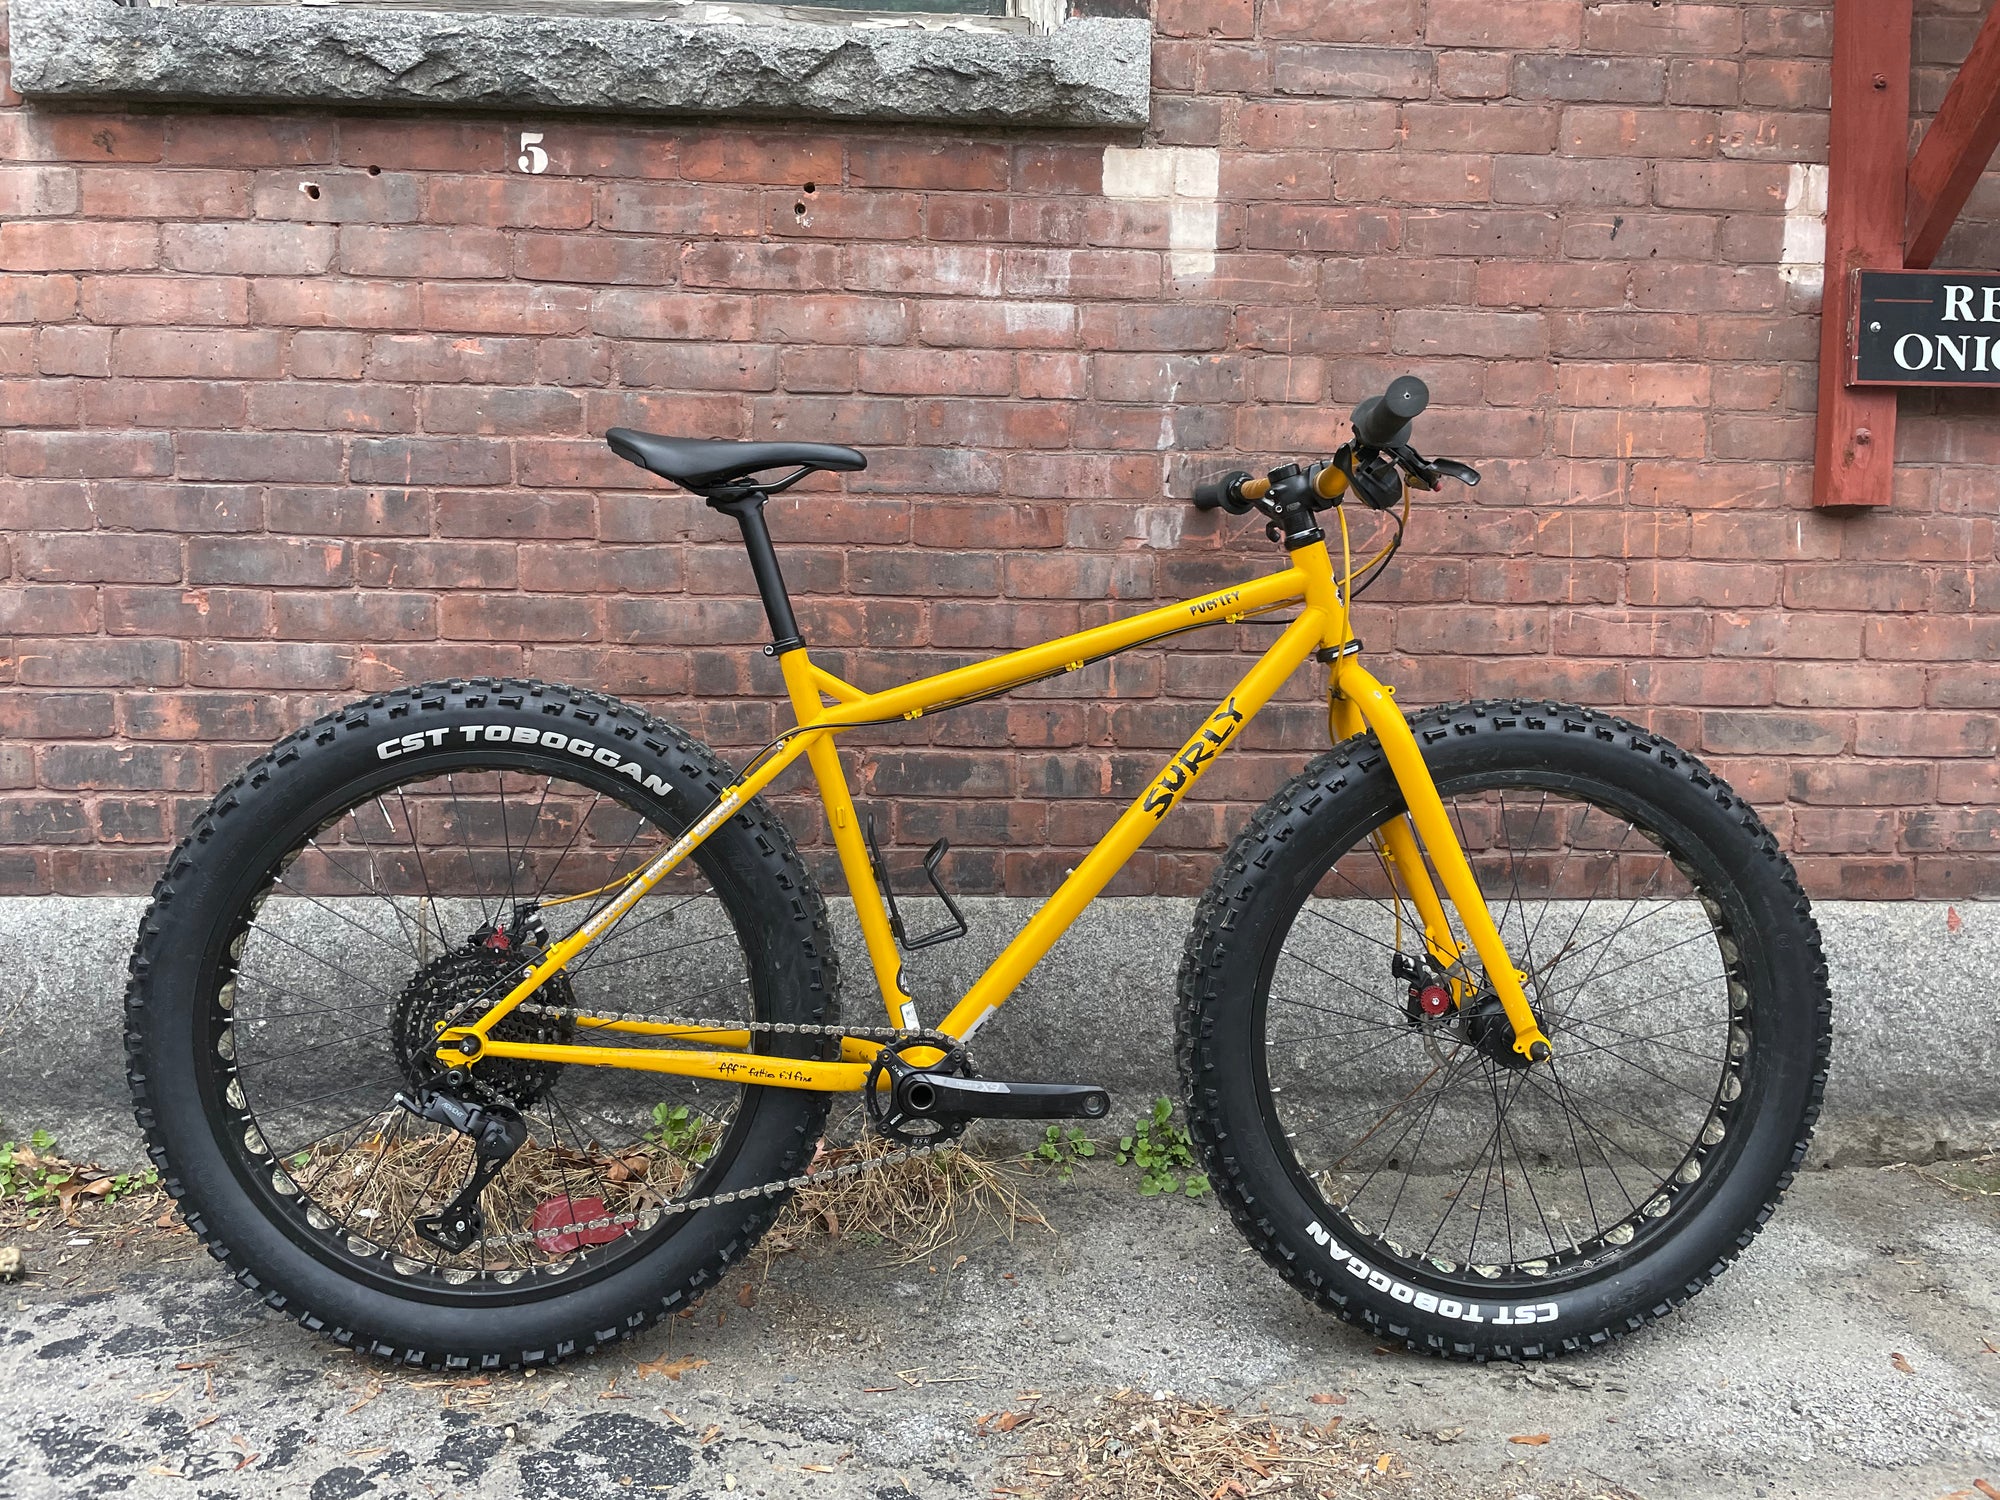 A Surly Pugsley Fat Bike leaning up against a brick wall